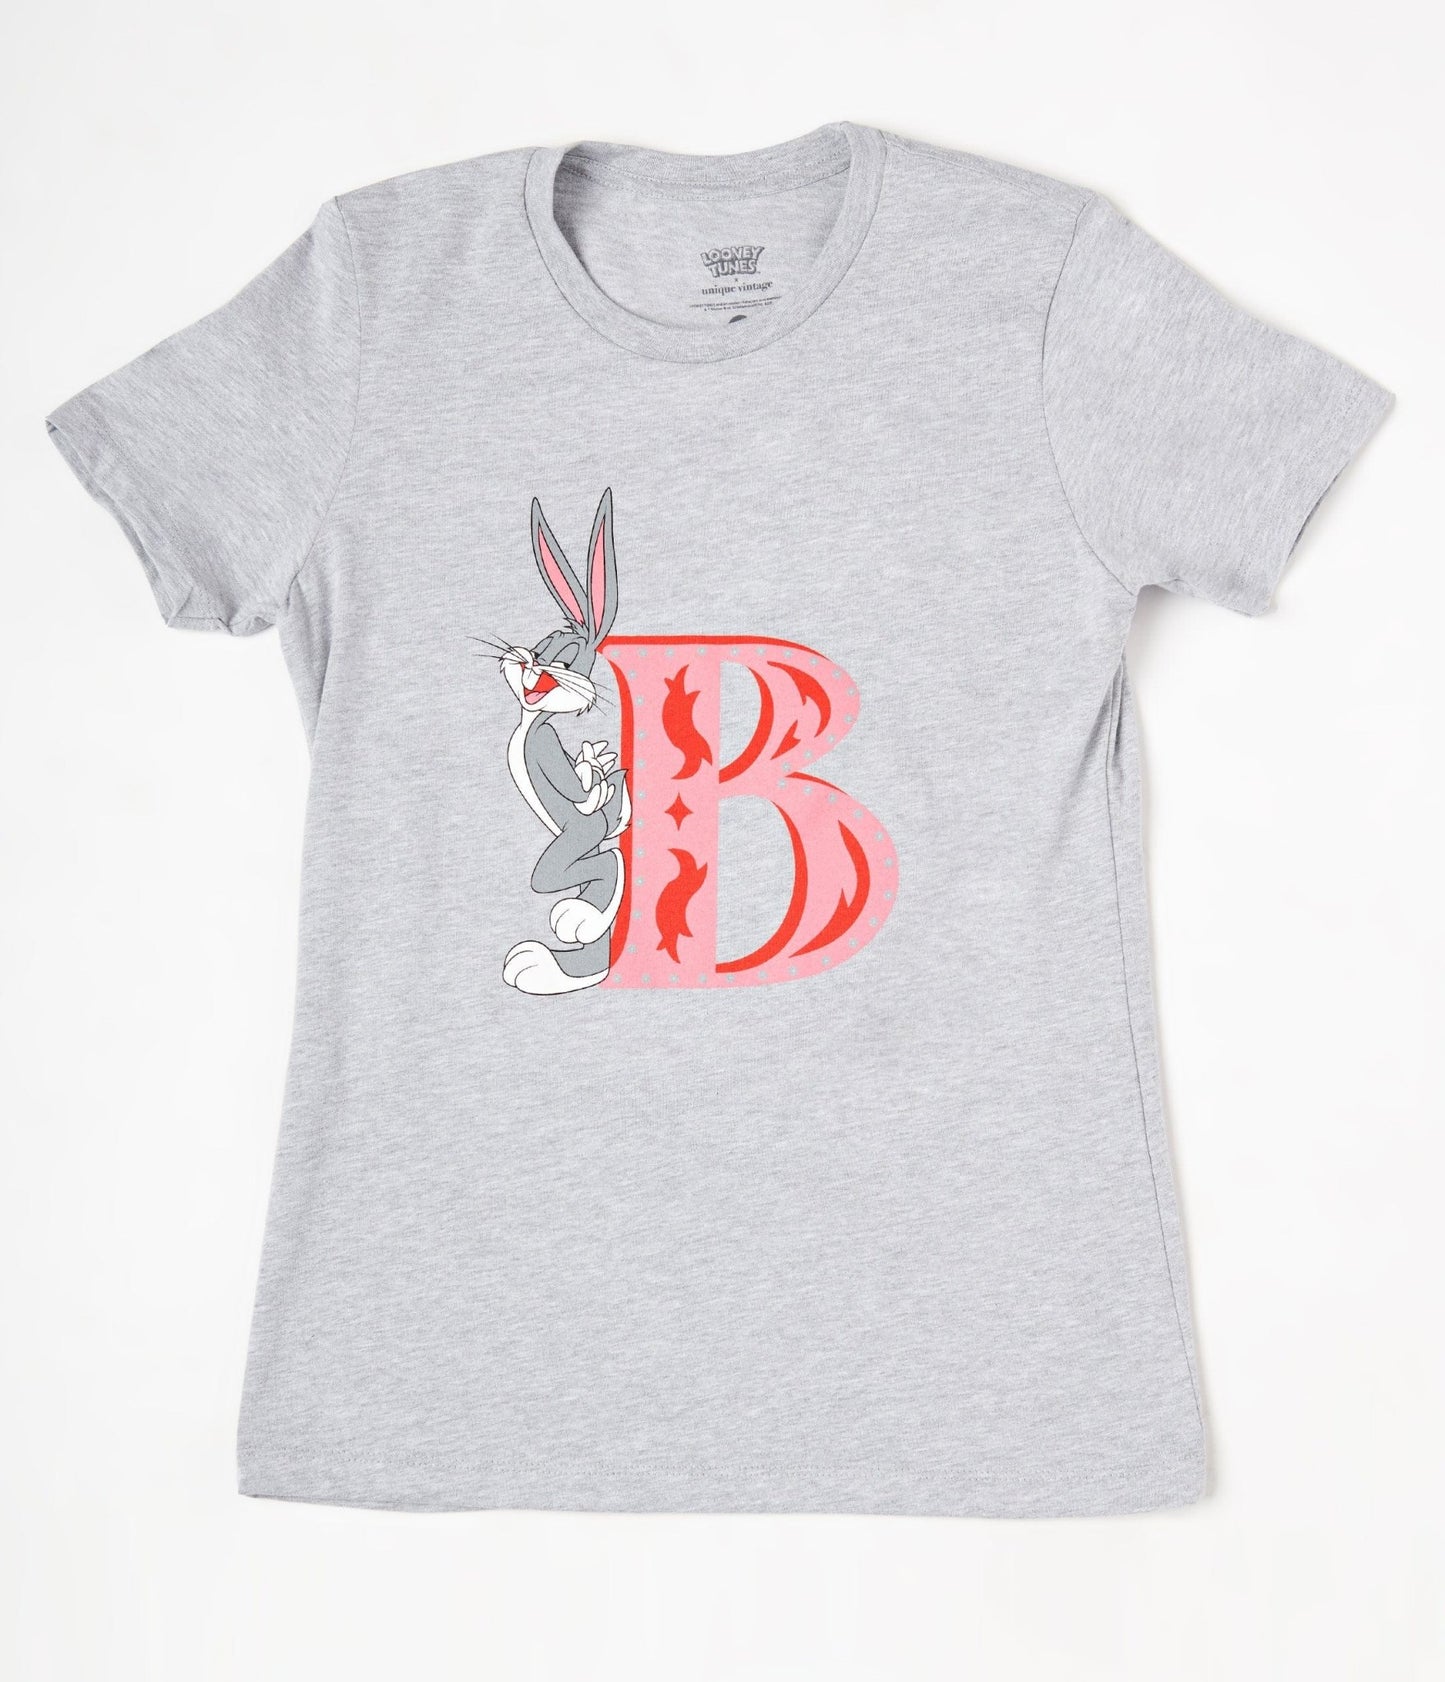 Looney Tunes x Unique Vintage Bug Bunny Fitted Graphic Tee - Unique Vintage - Womens, GRAPHIC TEES, TEES